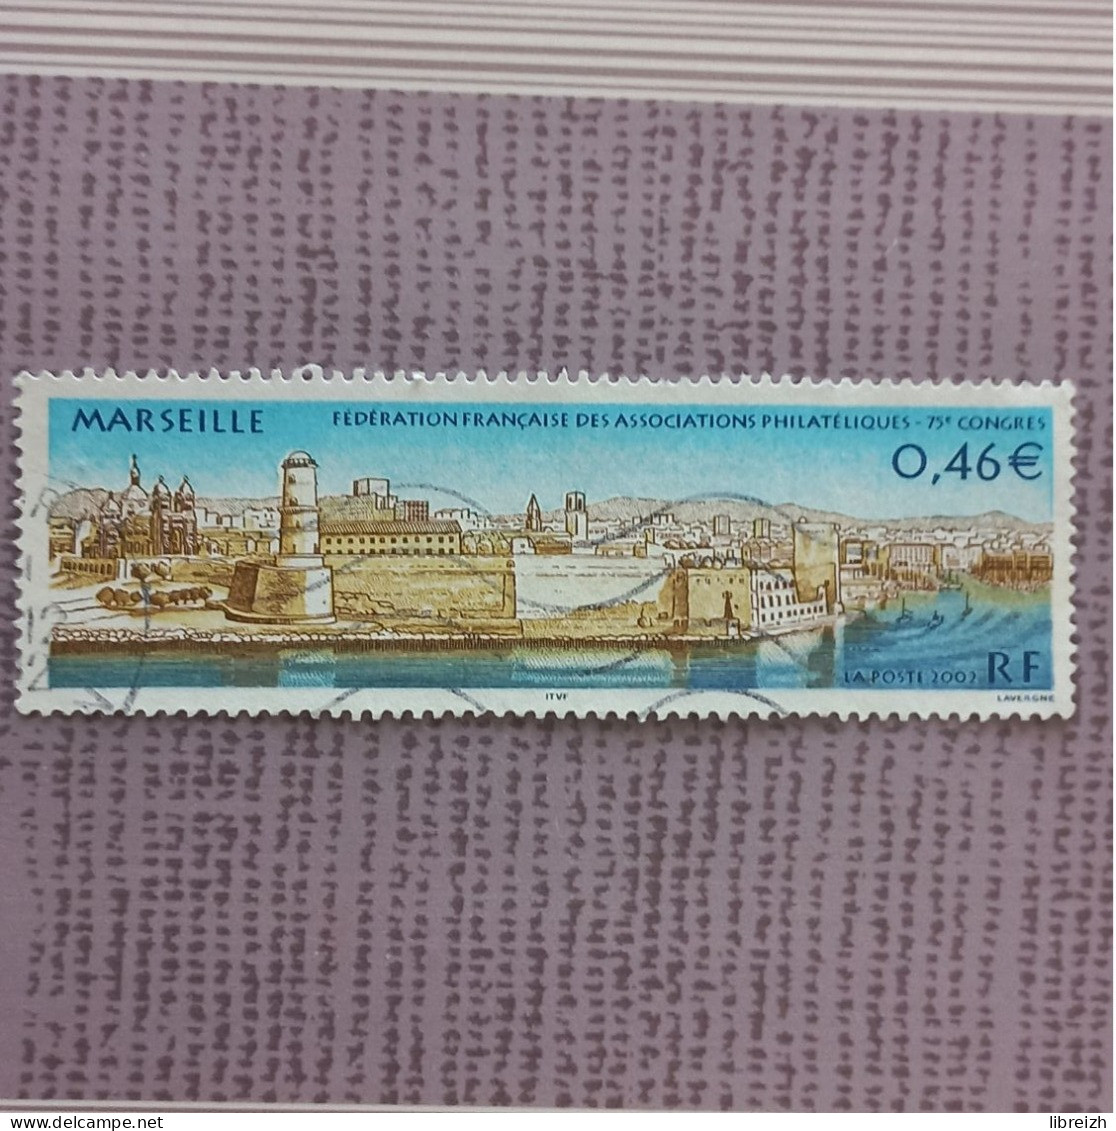 Marseille  N° 3489  Année 2002 - Used Stamps